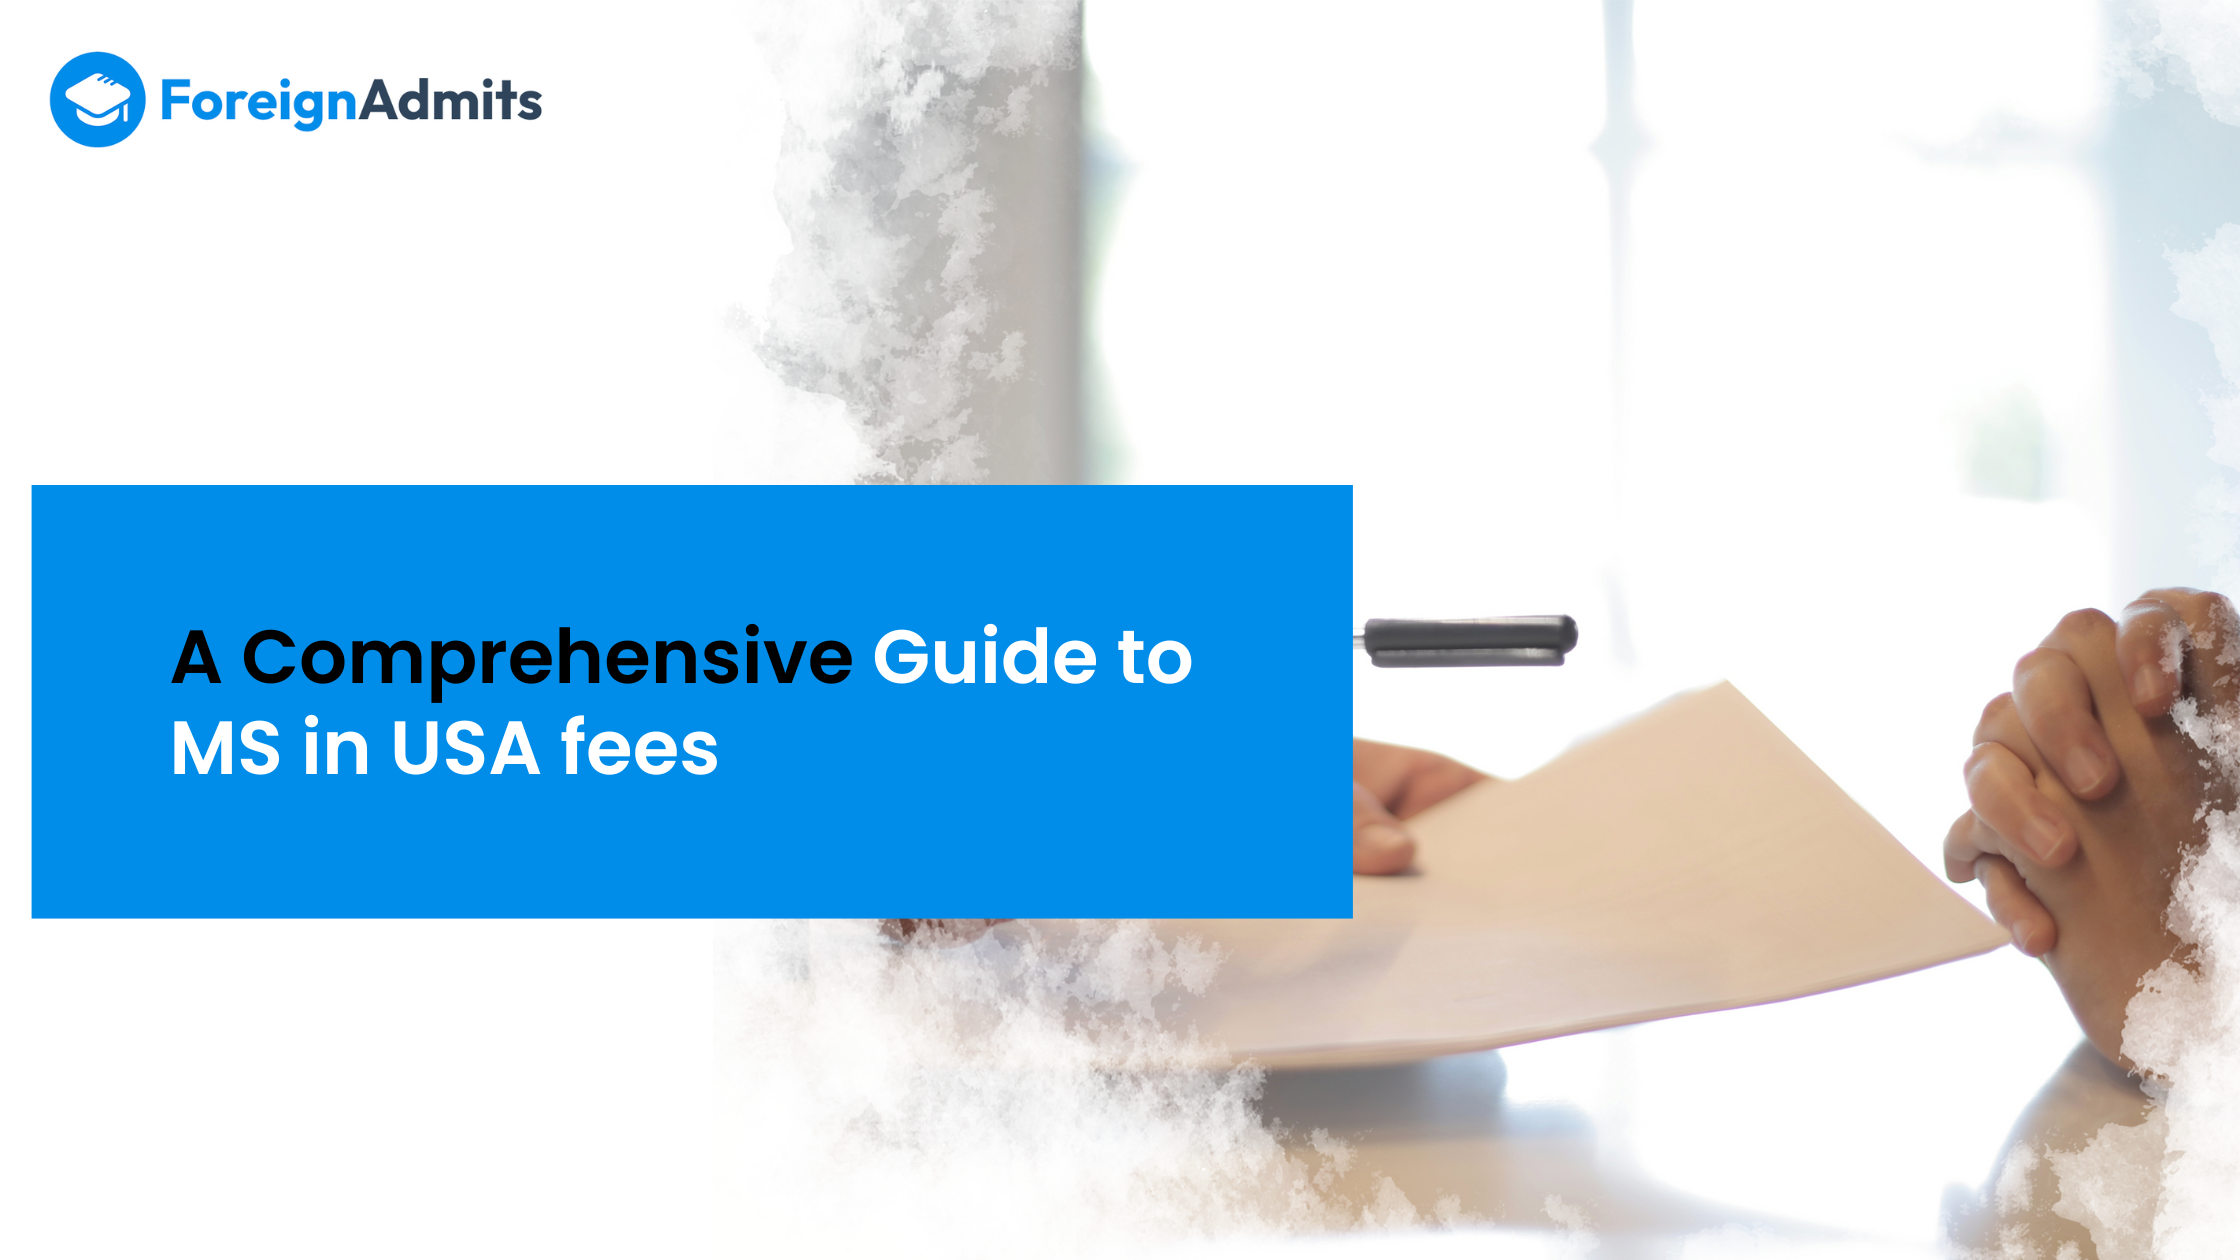 A Comprehensive Guide to MS in USA Fees